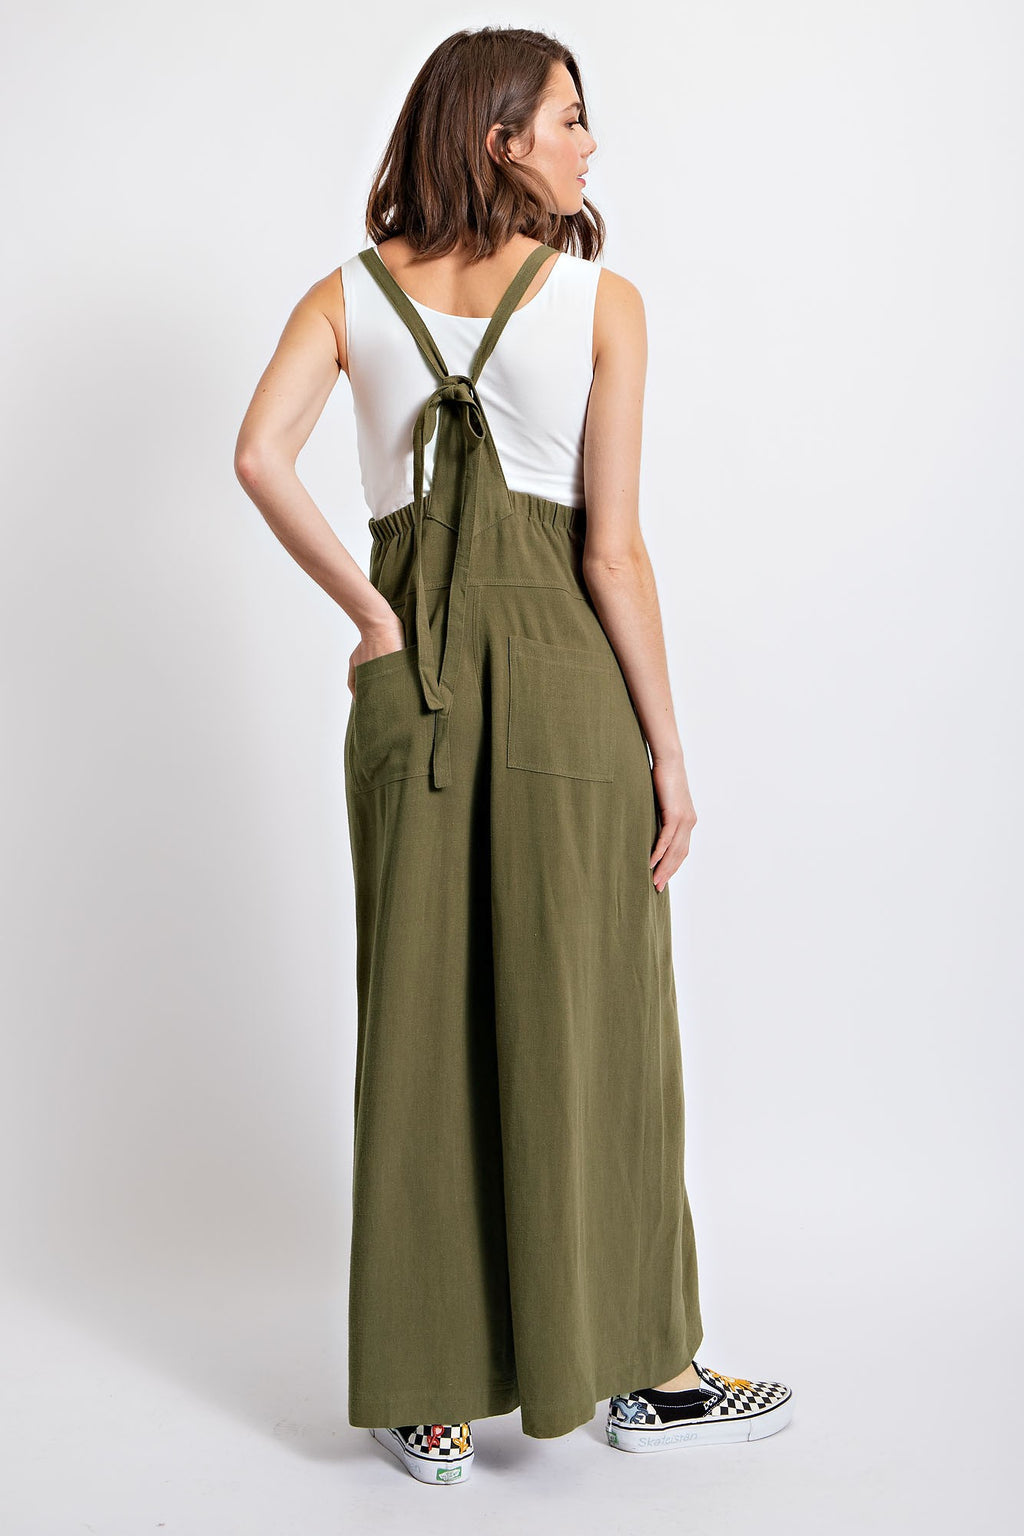 The Polly Overalls